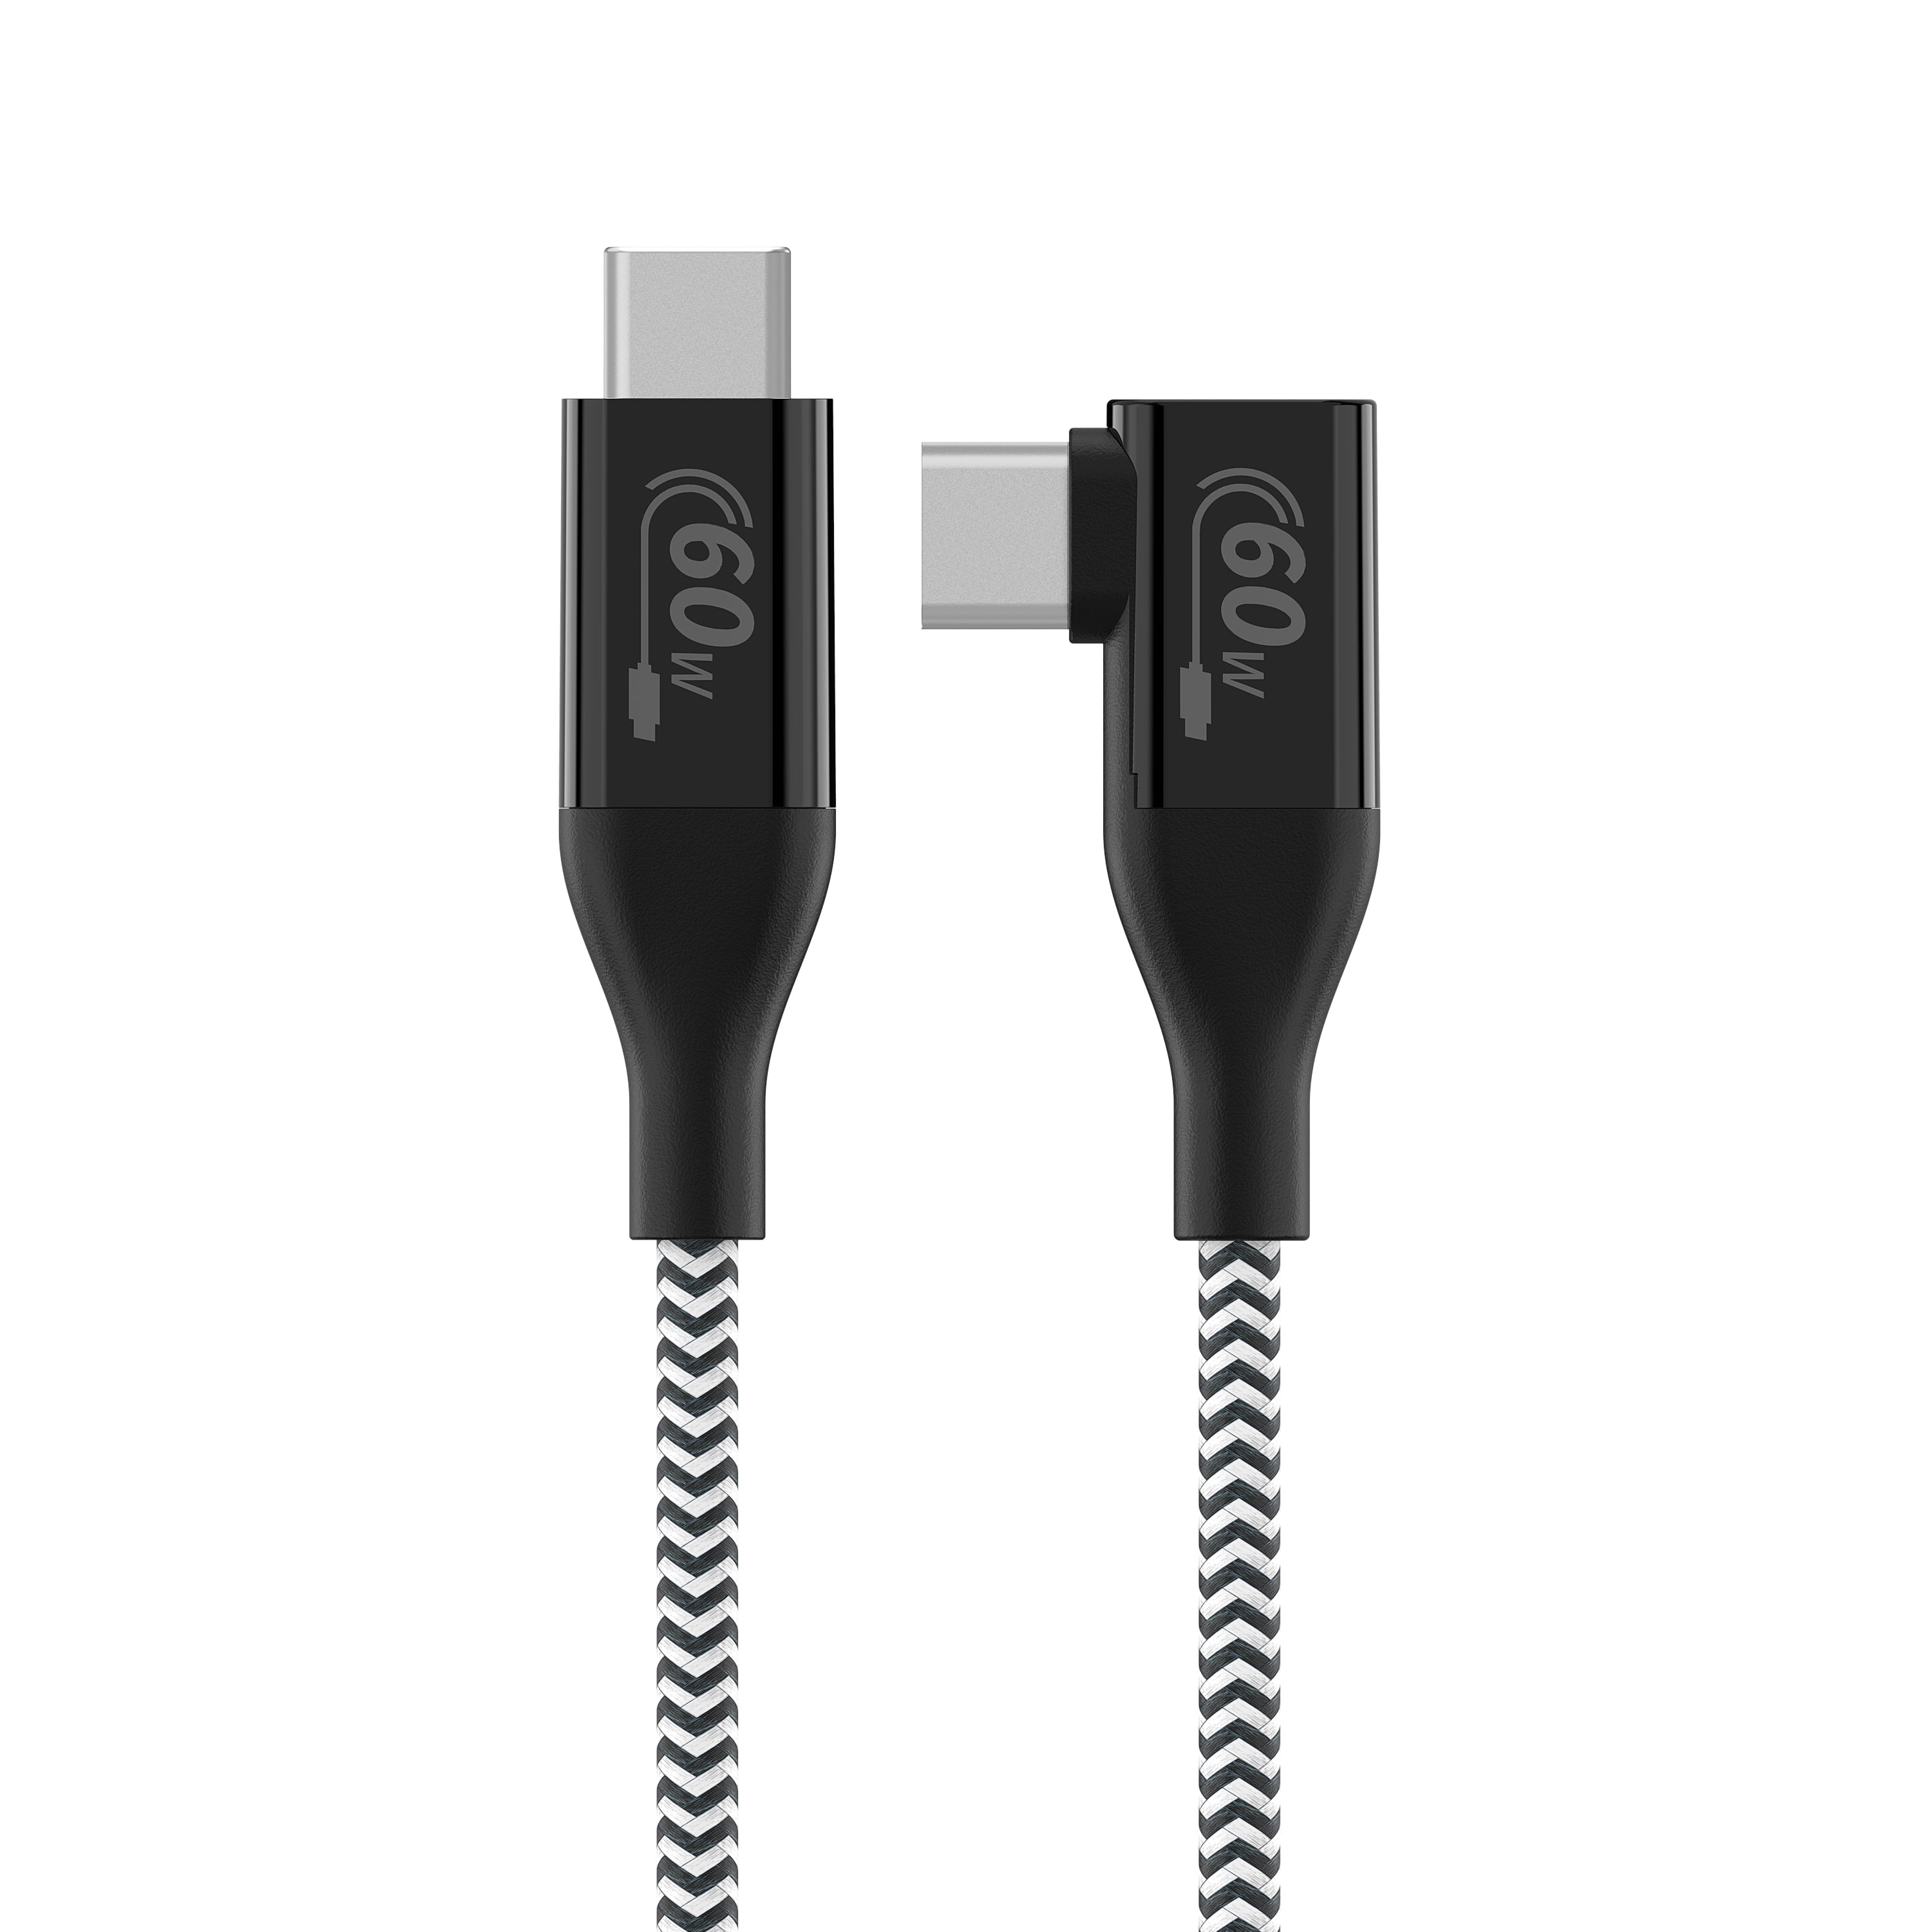 Auto Drive 90 USB Type-C  Data Sync and Charging Cable, Compatible with Android Devices, 6FT